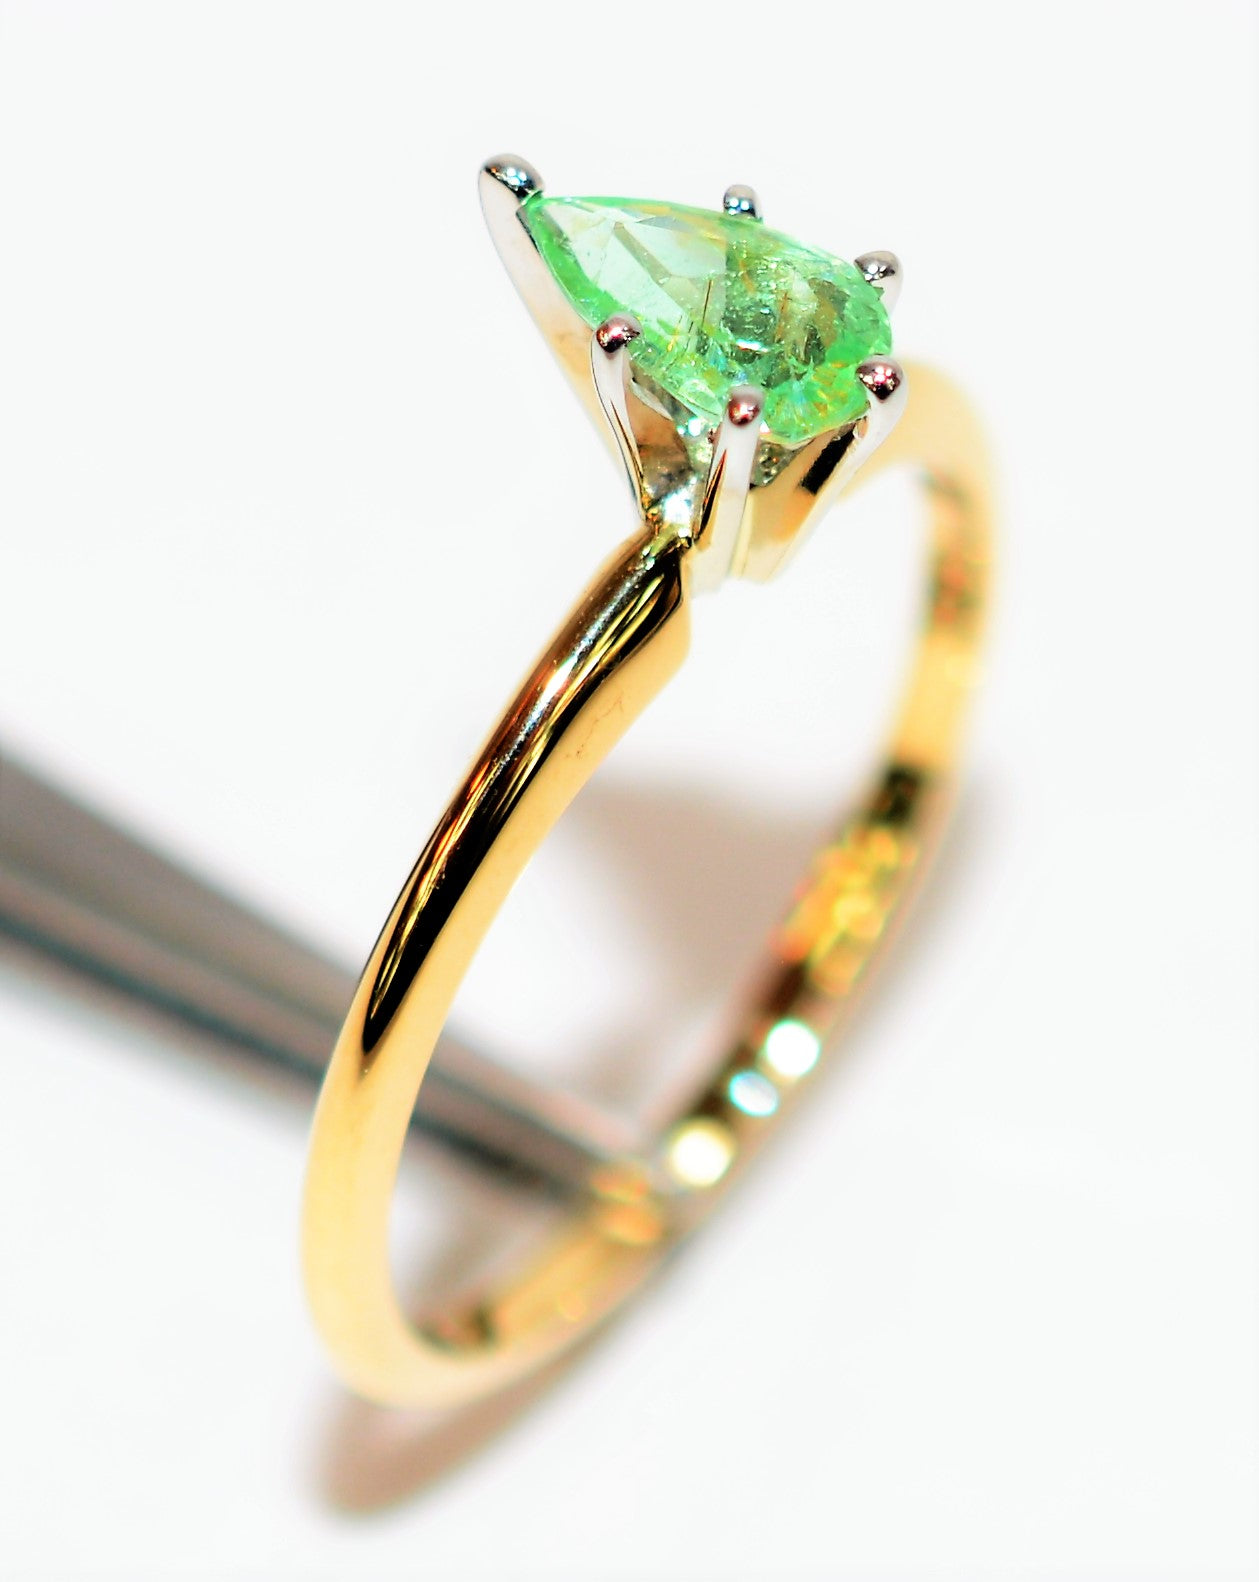 Natural Paraiba Tourmaline Ring 14K Solid Gold .40ct Engagement Ring Gemstone Ring Solitaire Ring Birthstone Ring Stackable Ring Promise